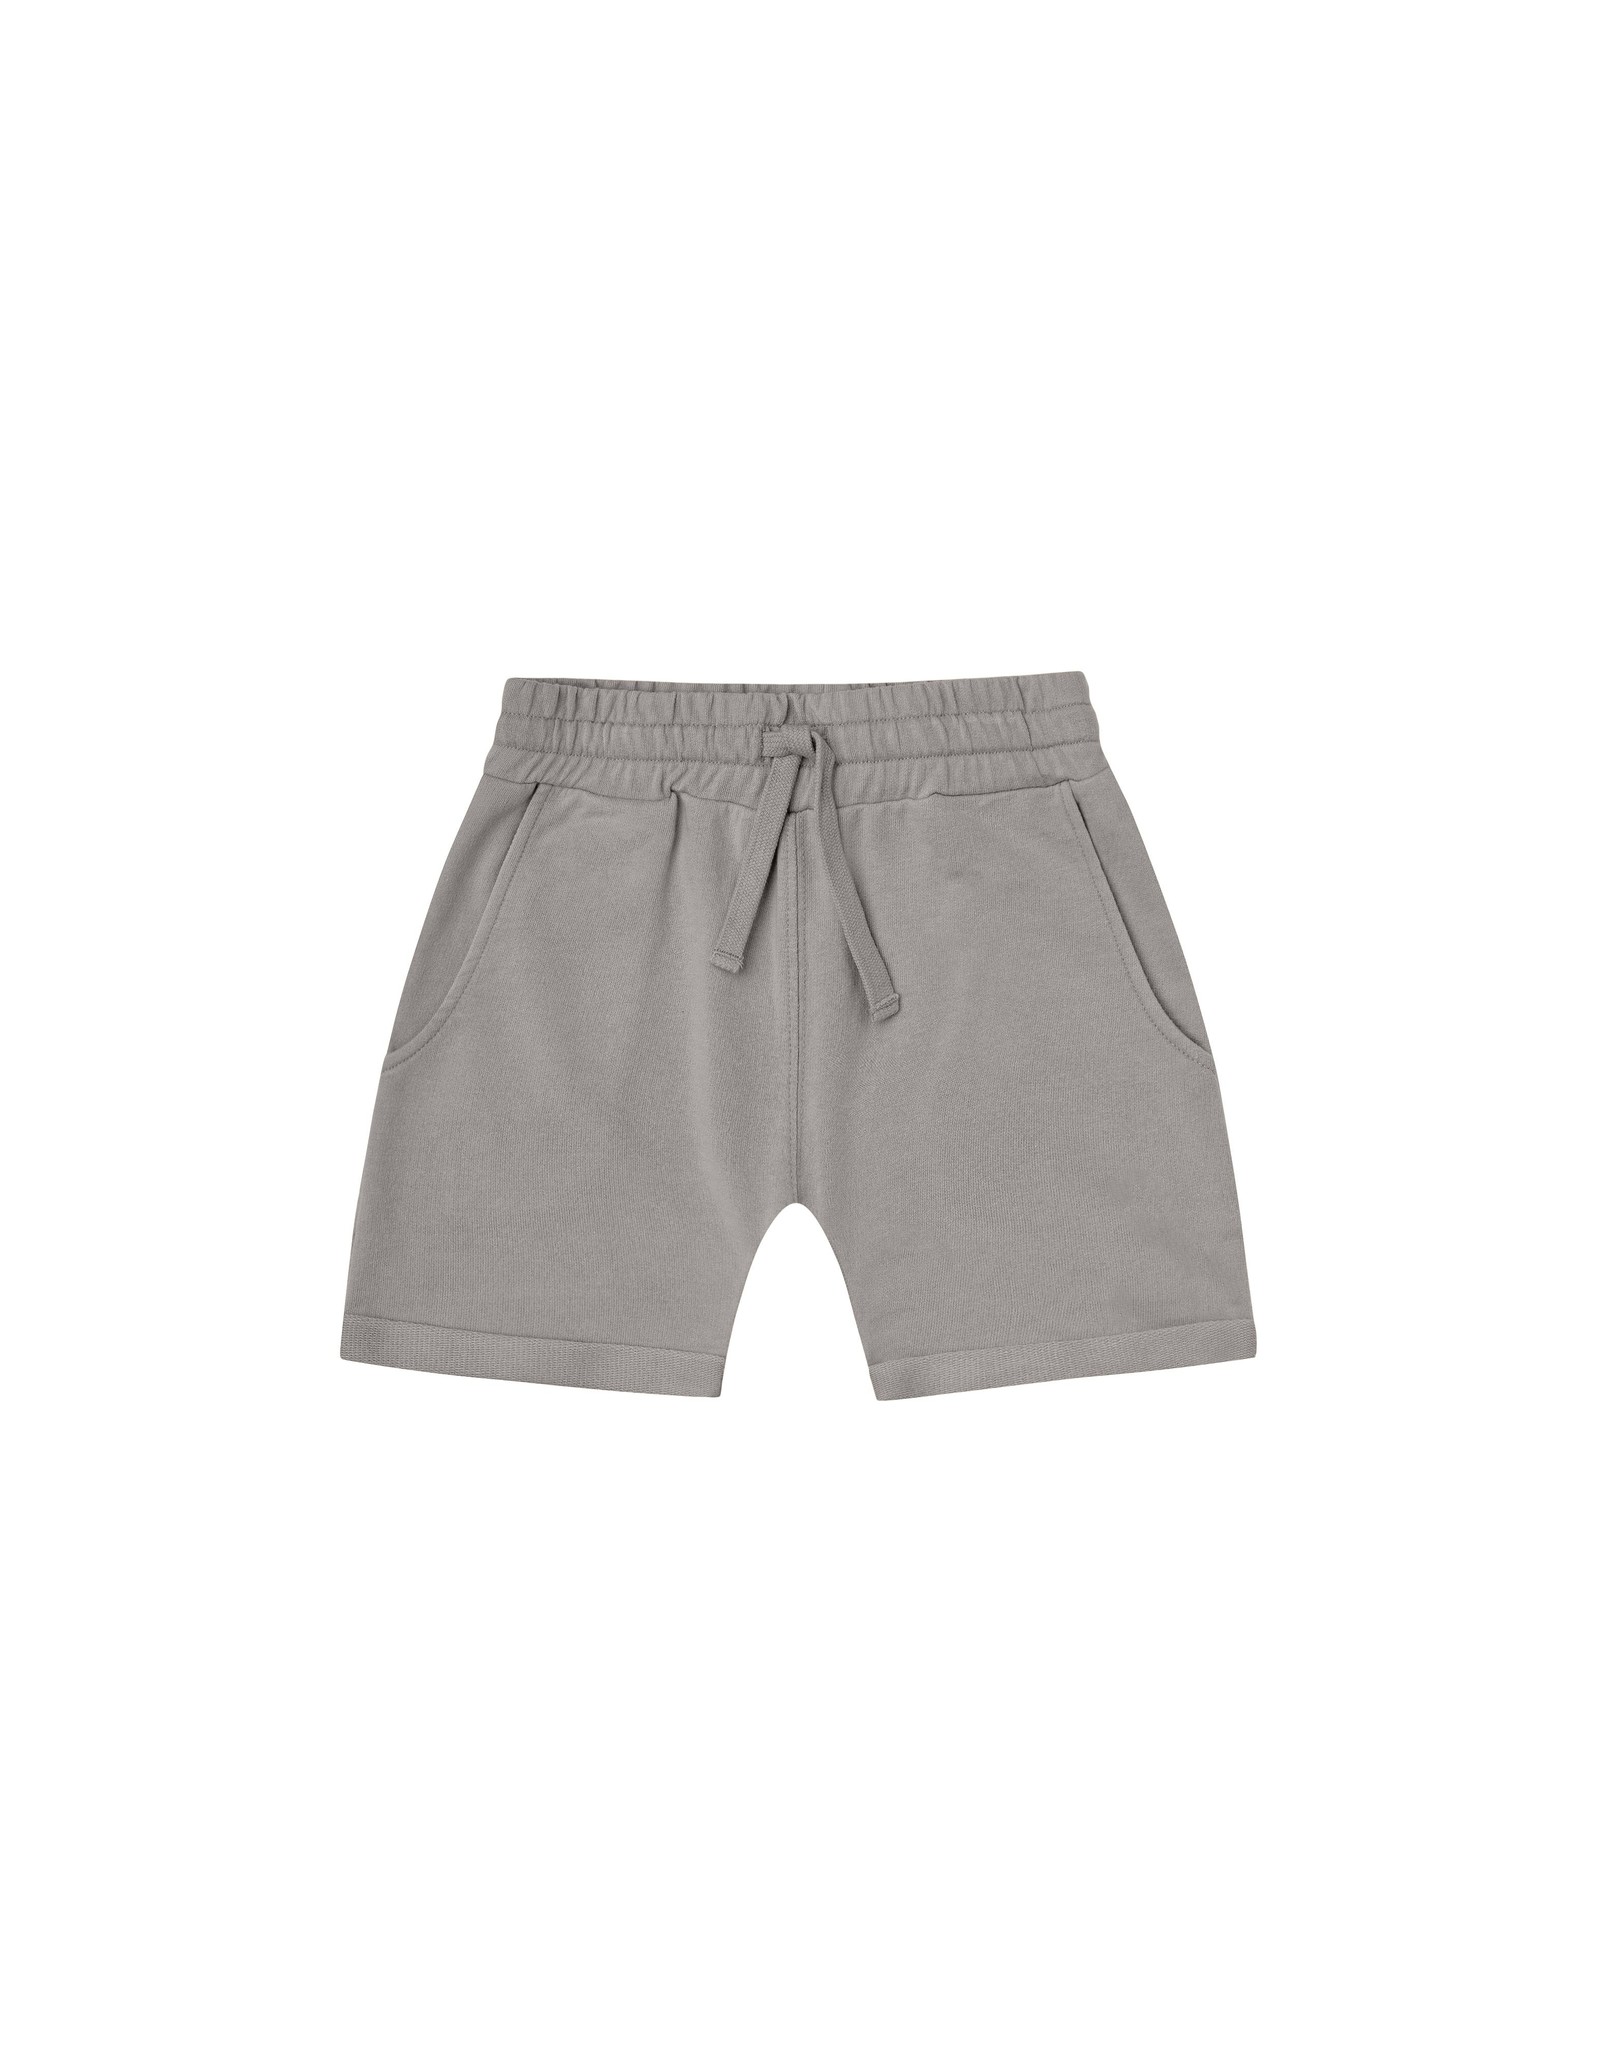 Rylee and Cru relaxed short- slate